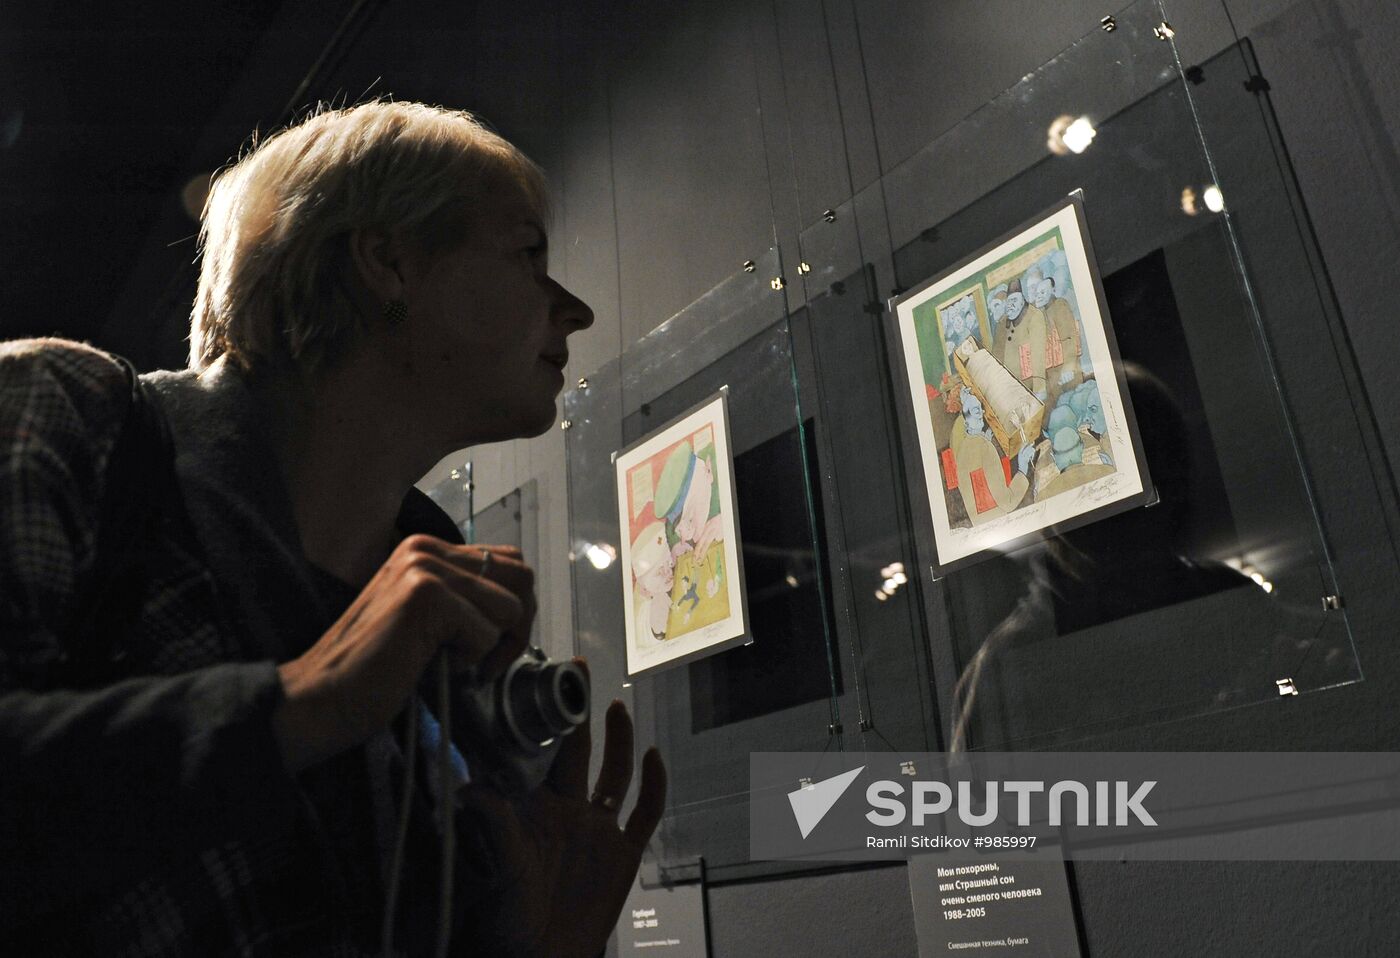 Opening exhibition "Shemyakin. Vysotsky. Two Destinies"